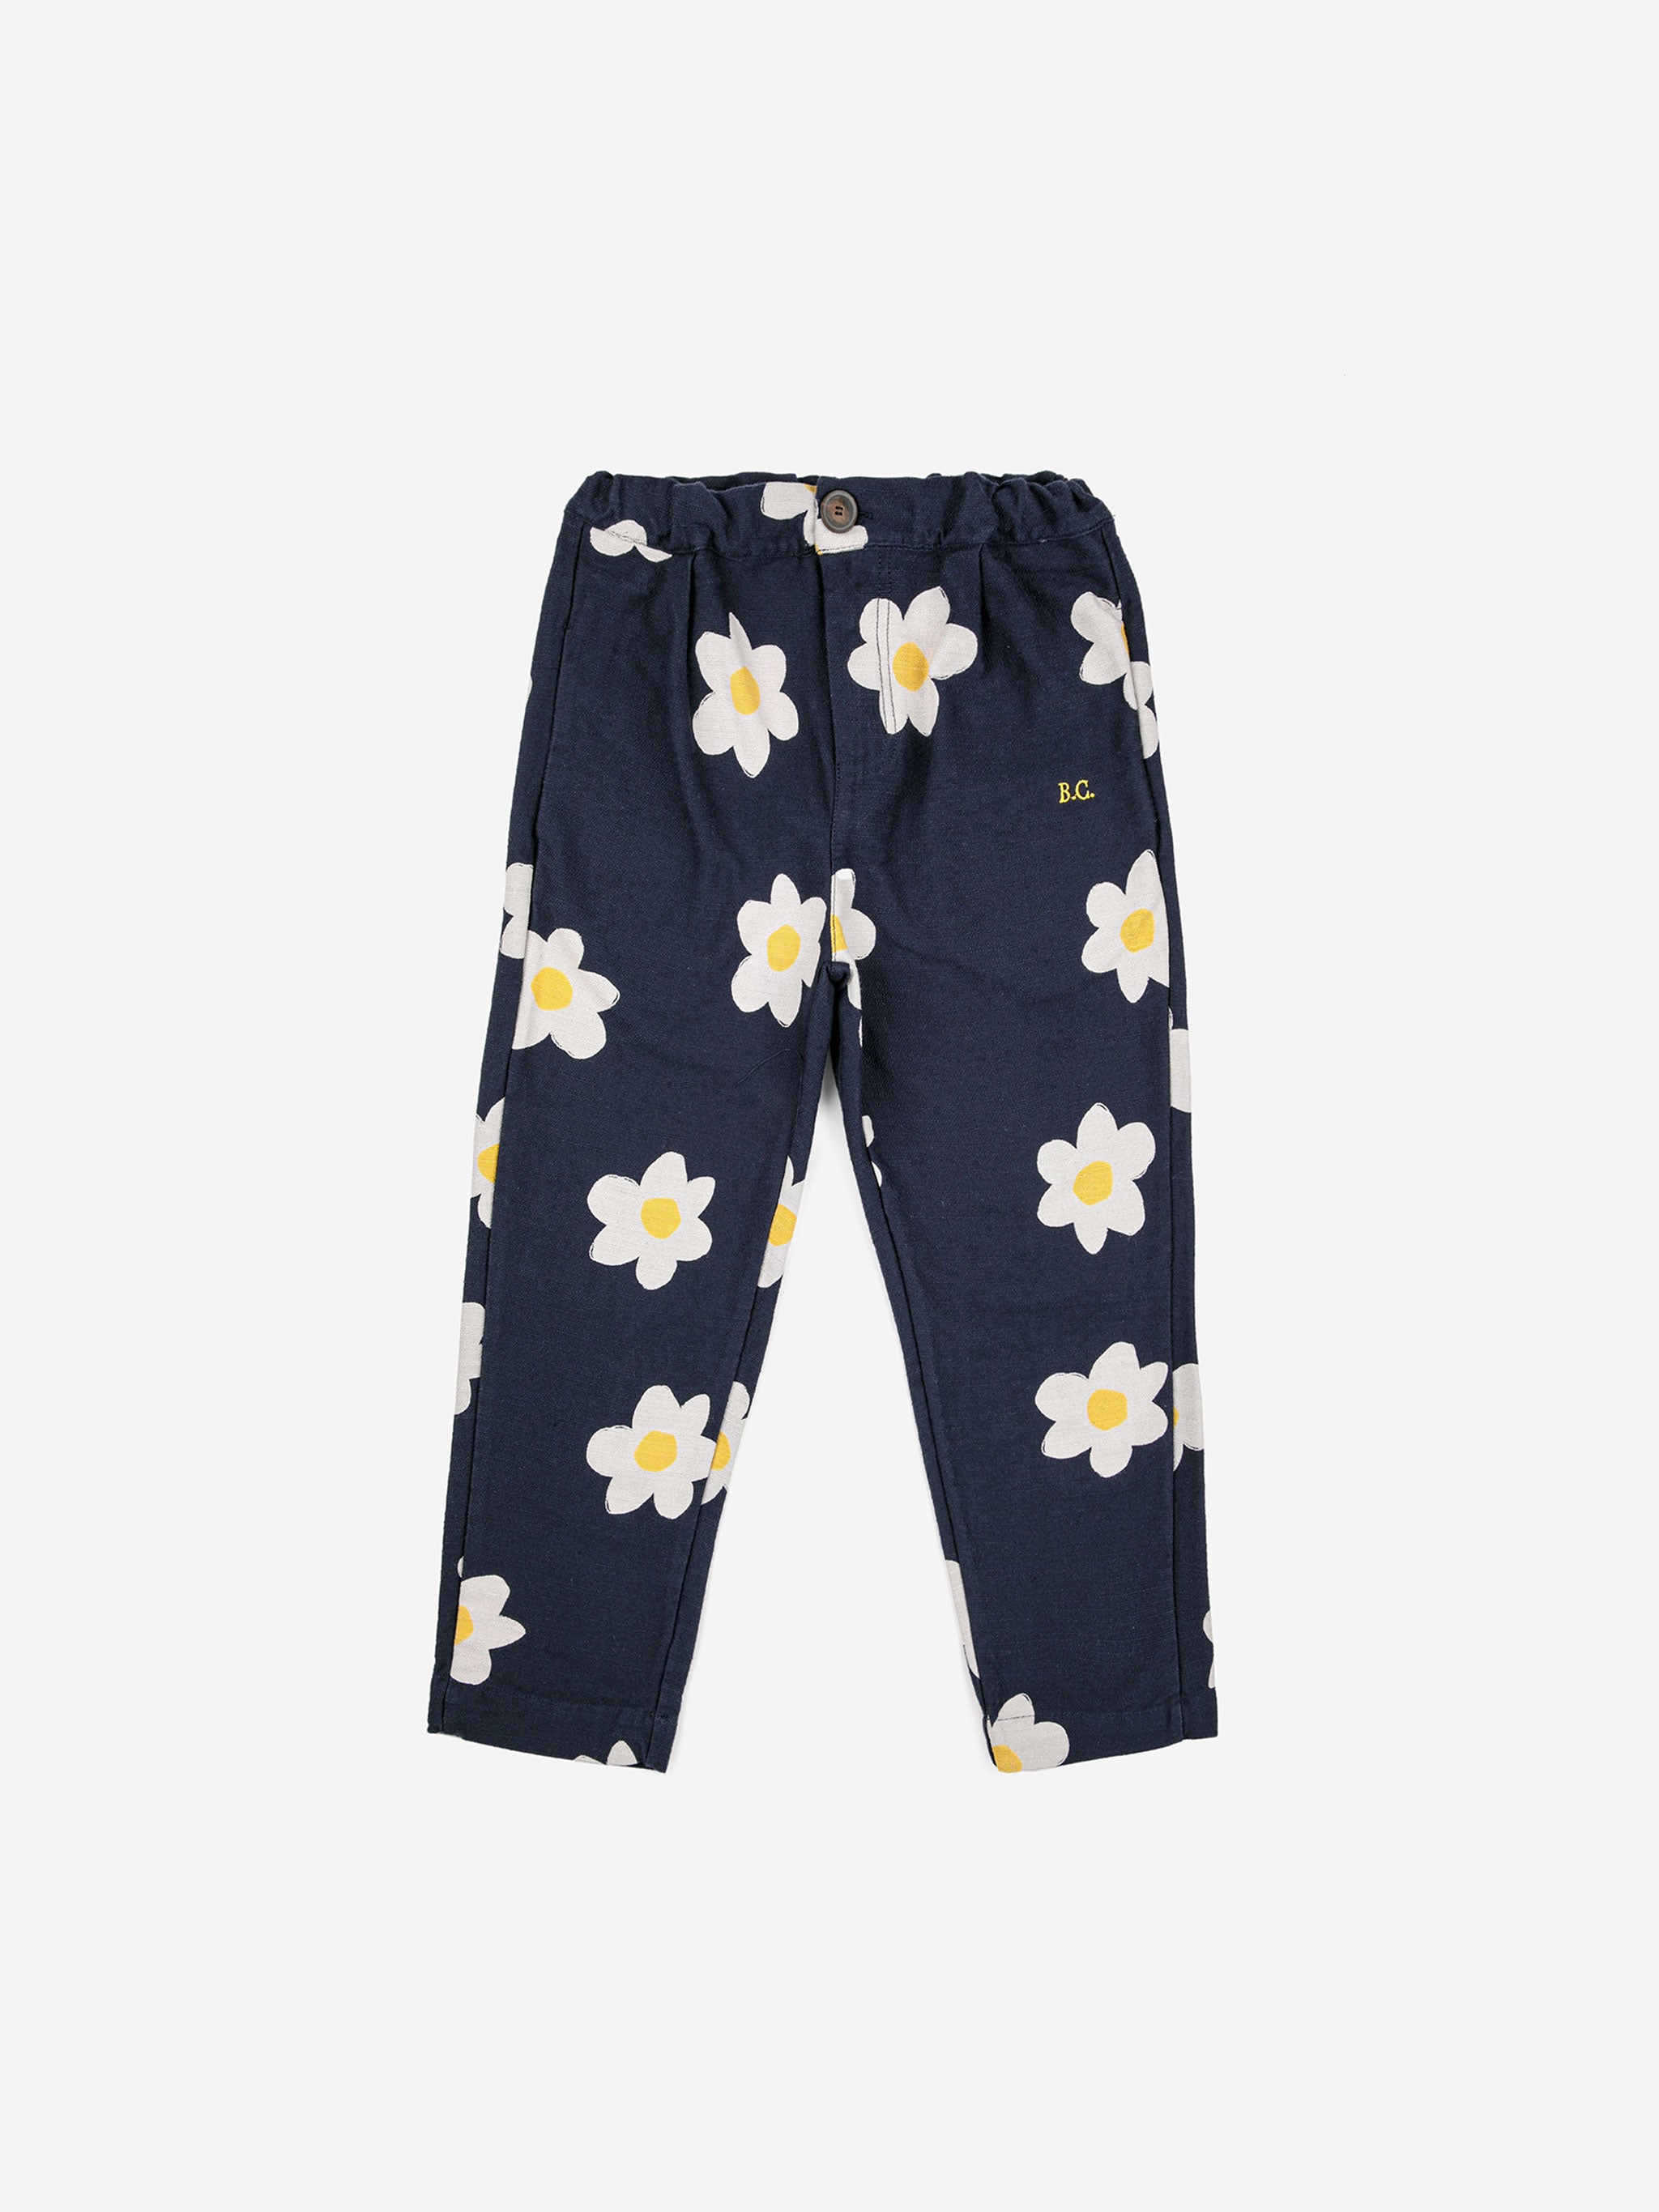 Crazy Bicy all over baggy pants – Bobo Choses